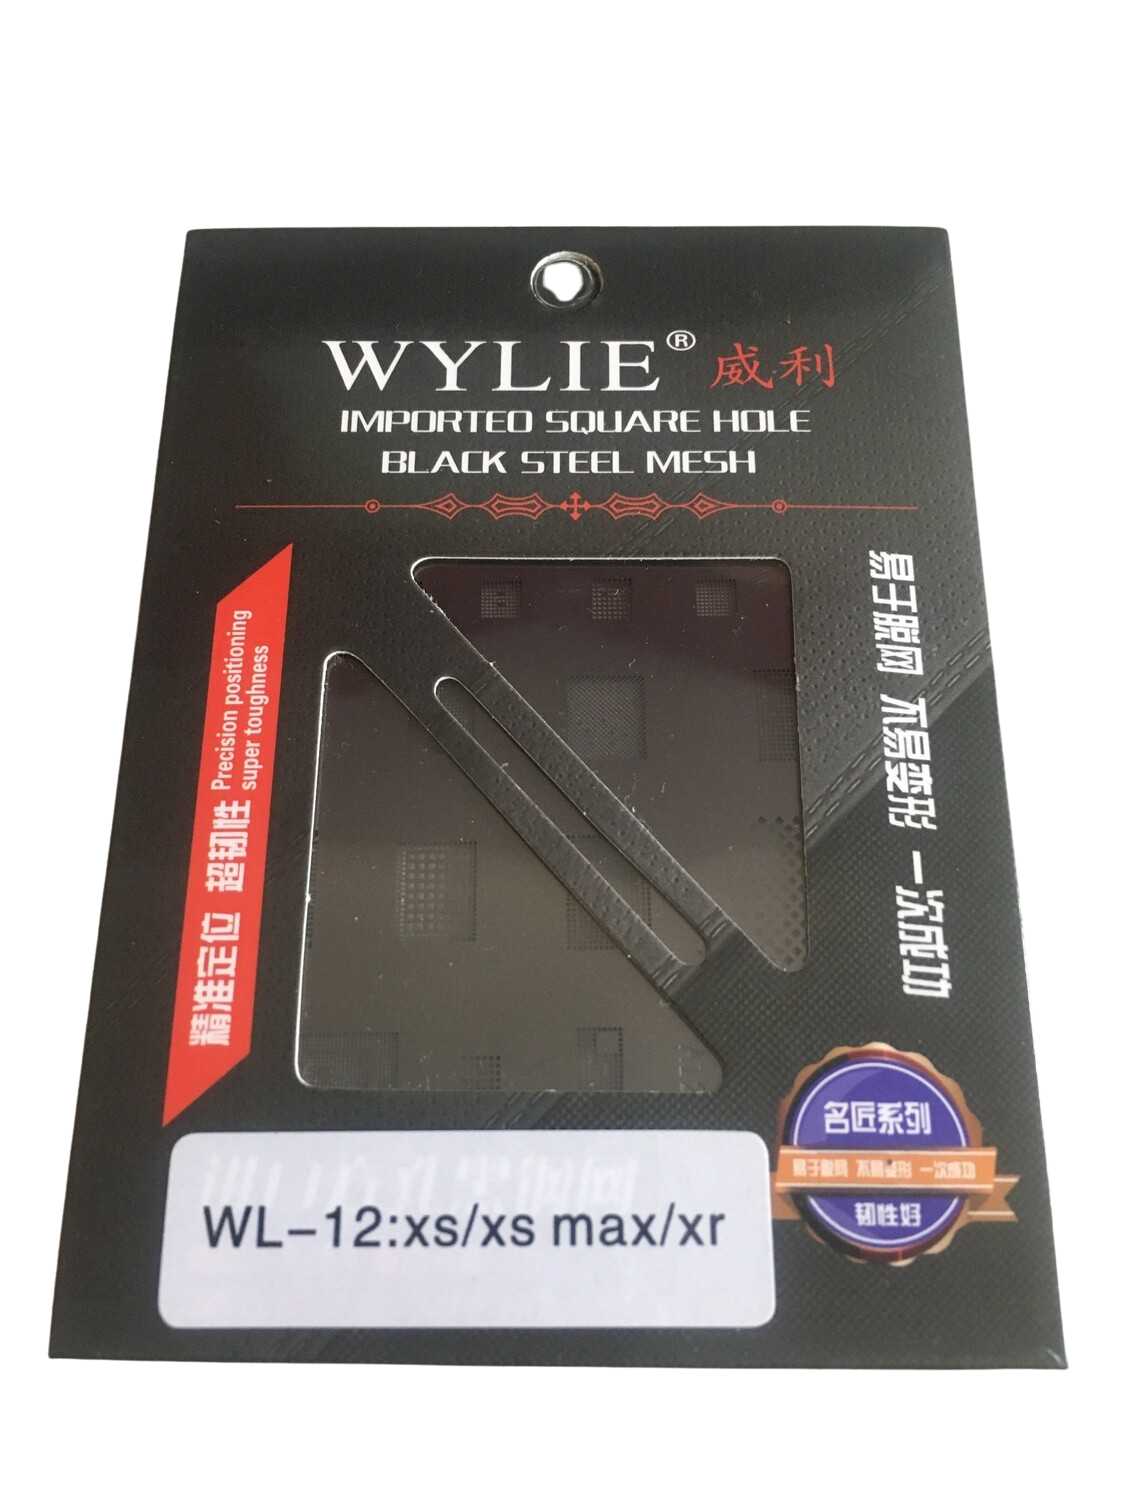 iPhone 6s/6s+ -  BGA Reballing Stencil by Wylie - 2D